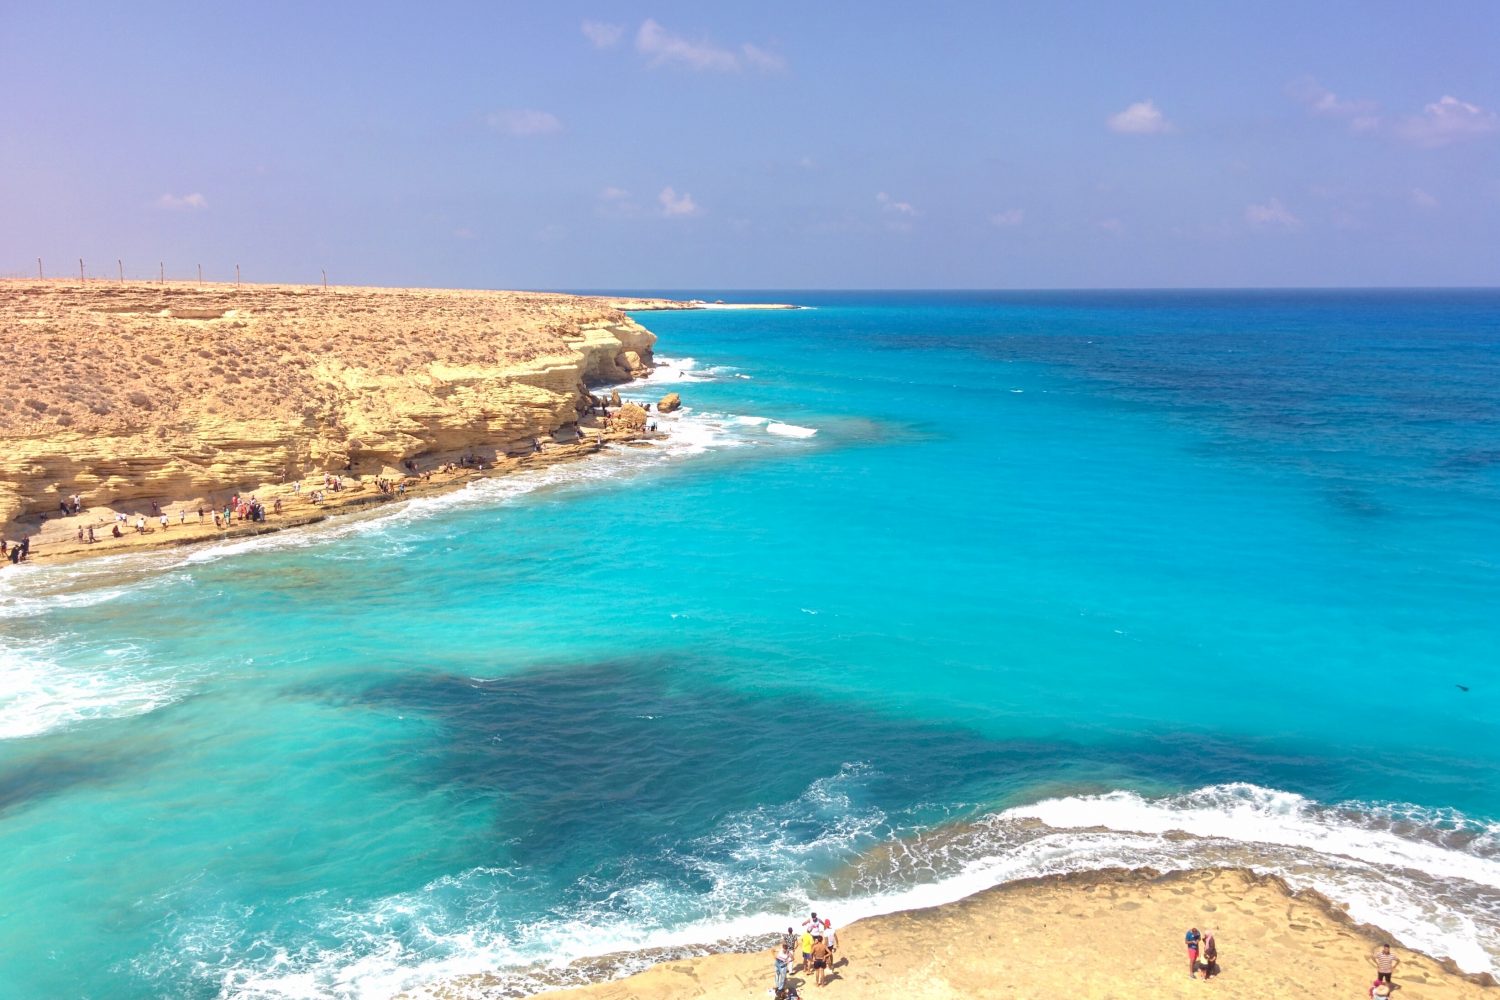 Panoramic view from the cliffs and beach of Agiba rock in Marsa Matrouh, Egypt